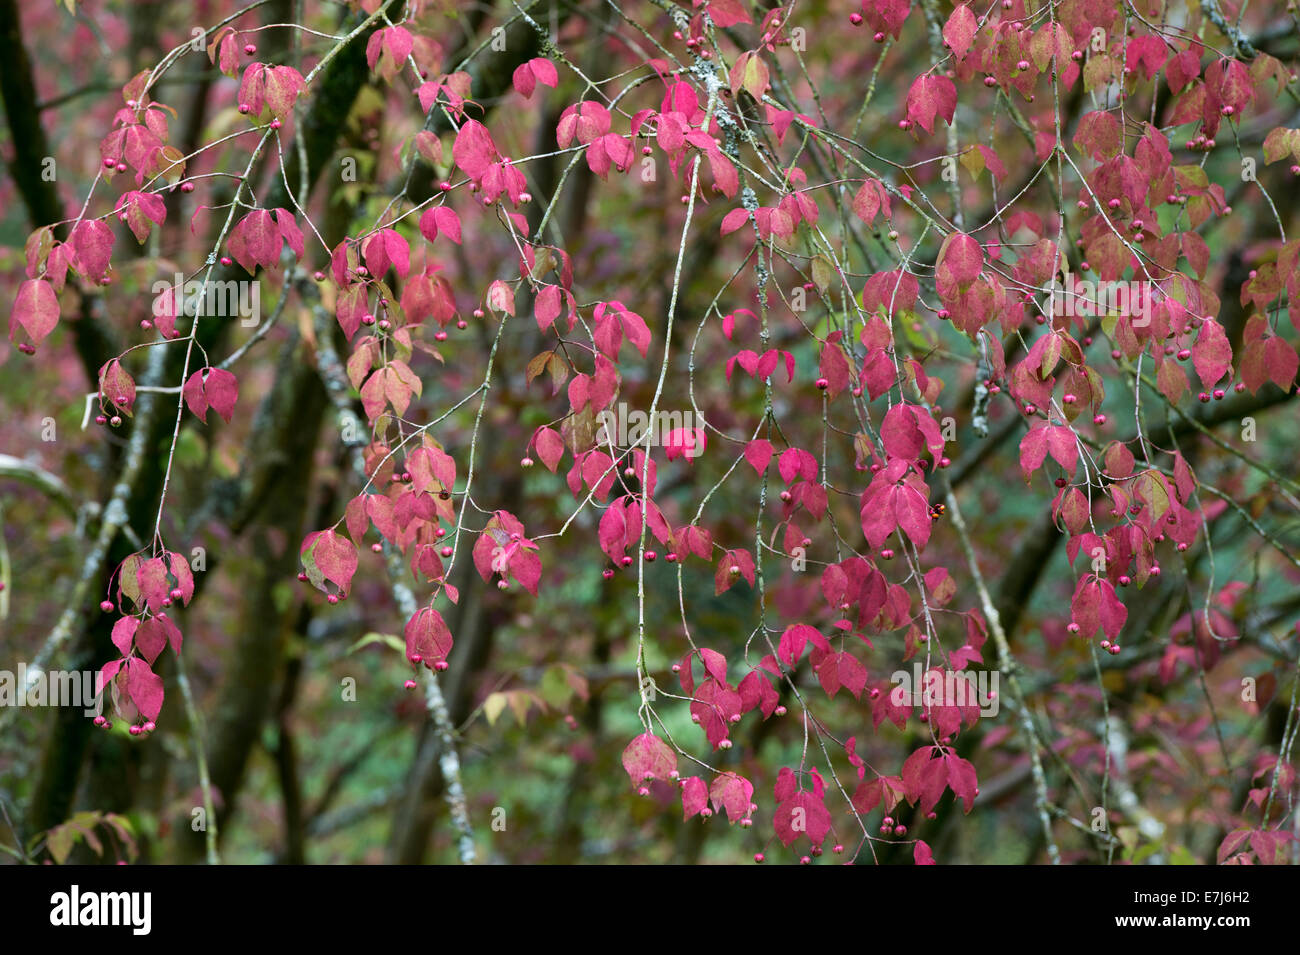 Euonymus oxyphyllus. Korean Spindle Tree seed pods and seeds Stock Photo